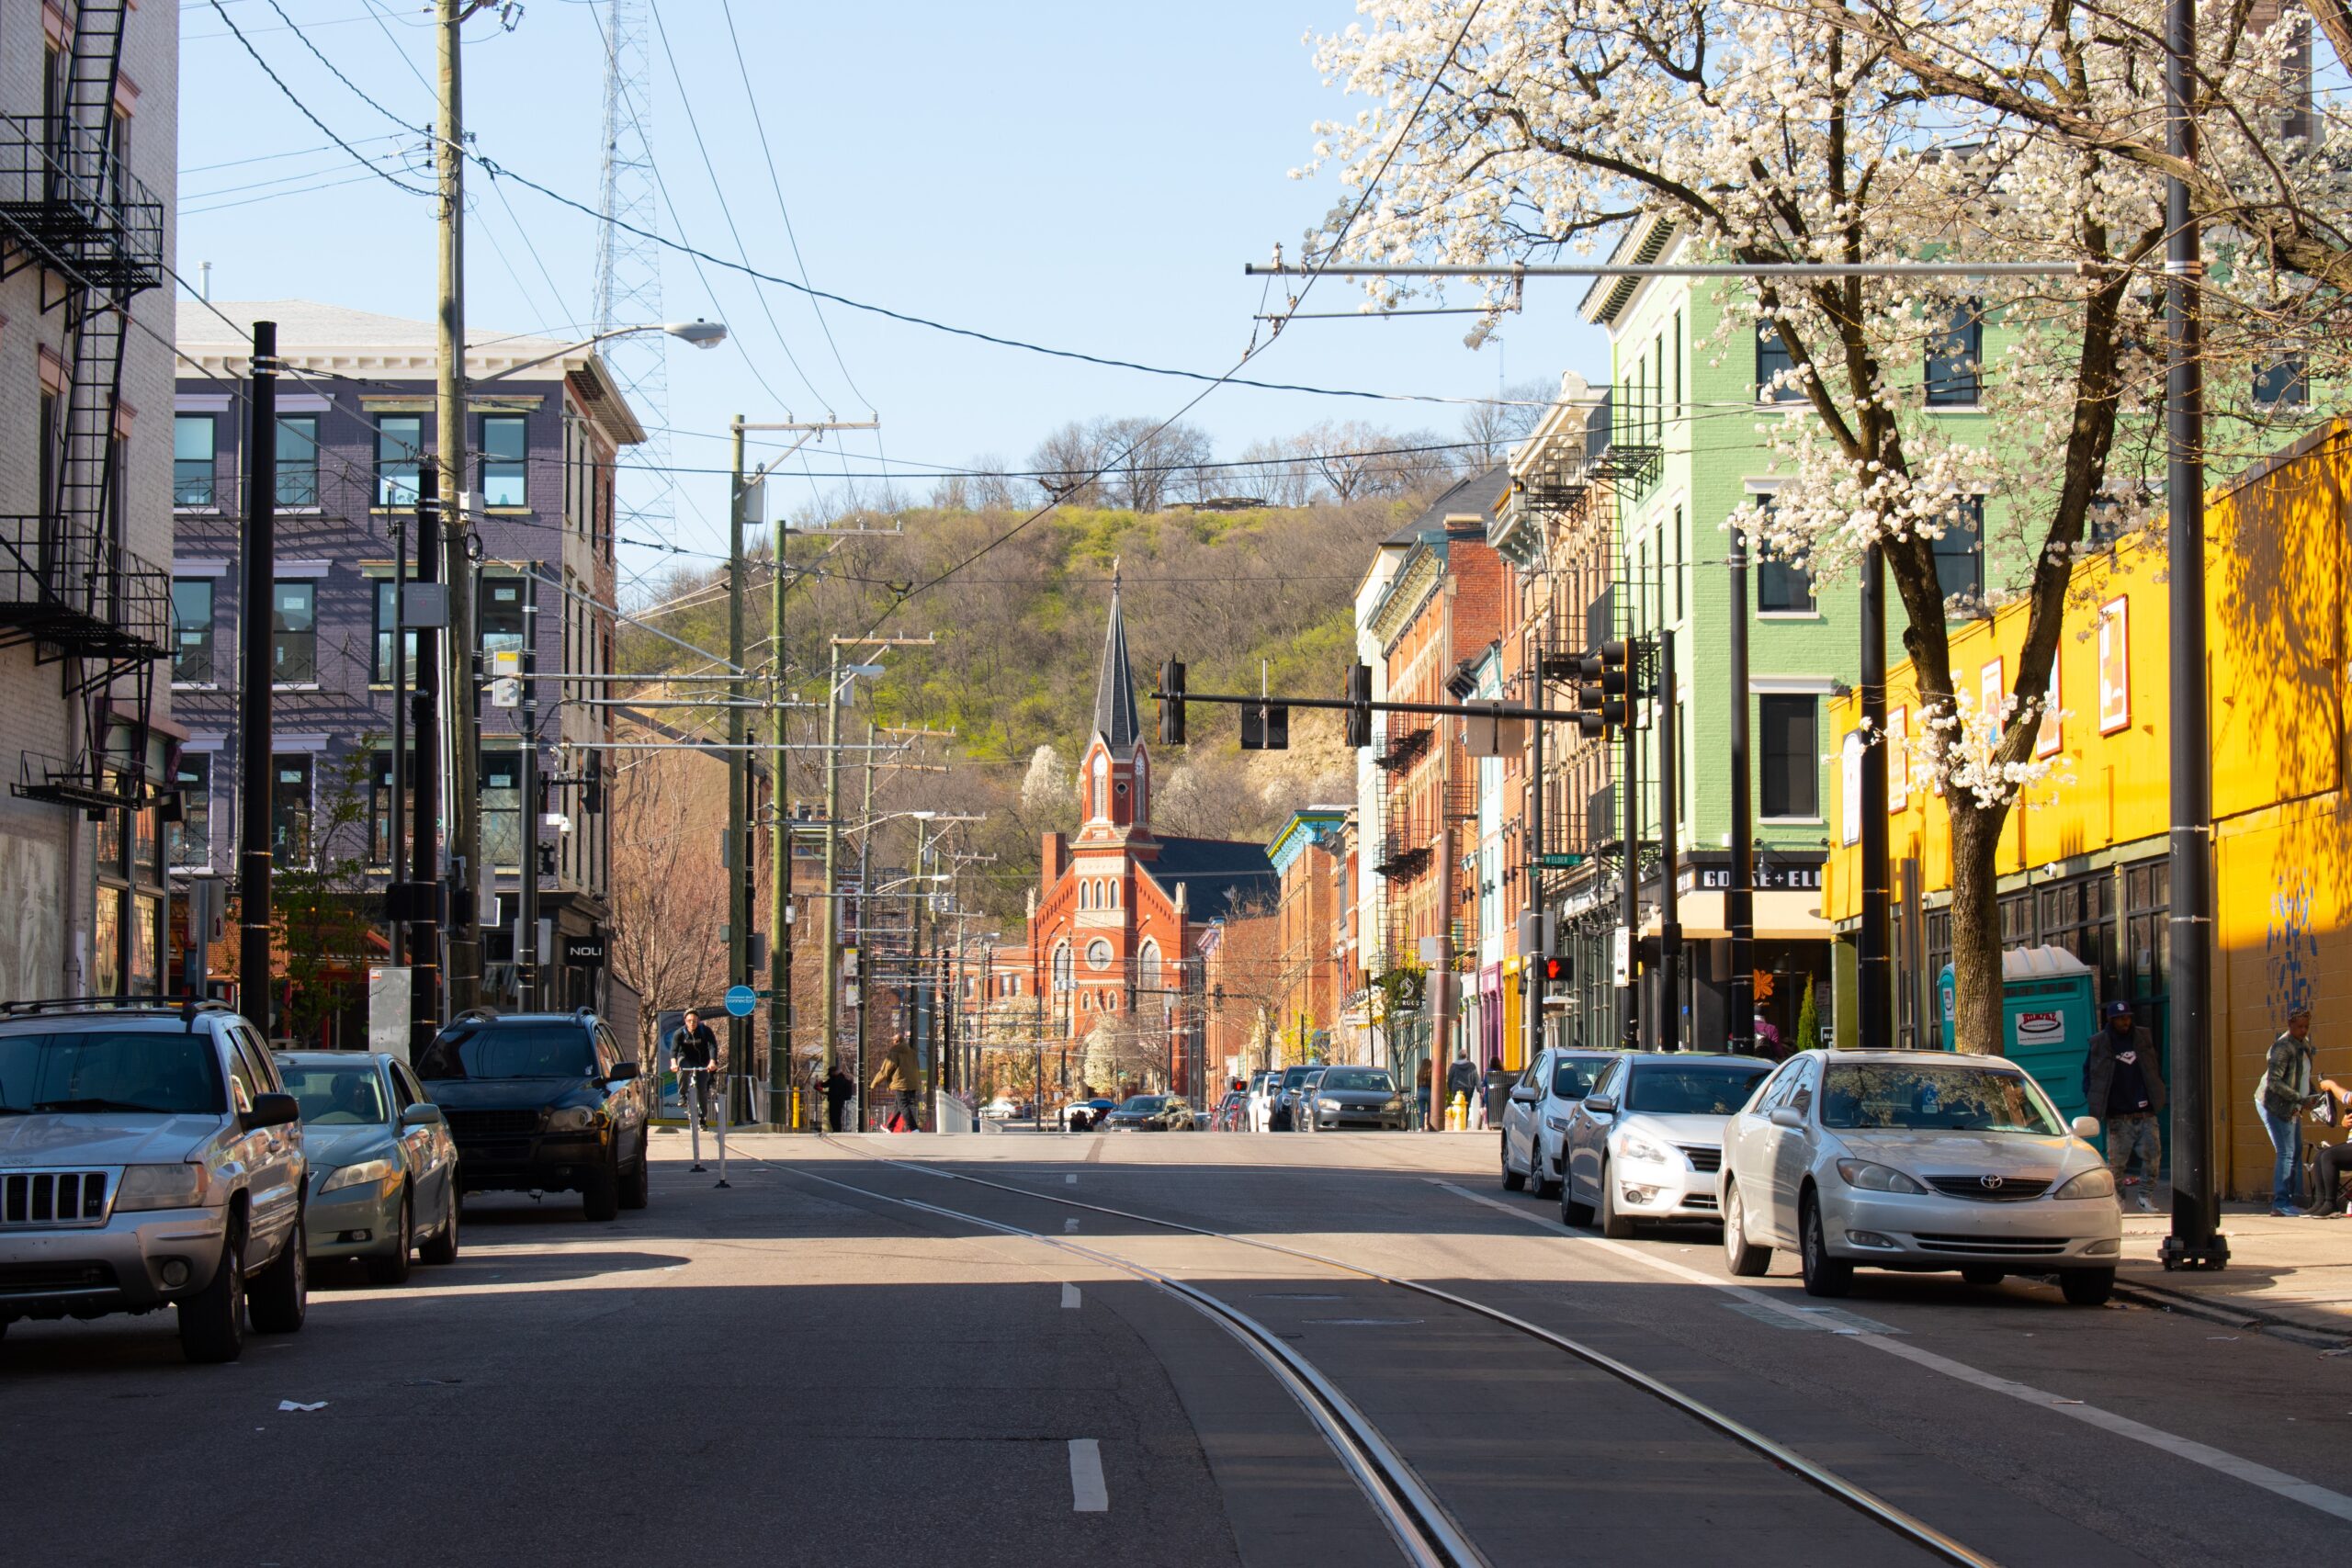 The weather and seasons of Cincinnati can cause trouble for travelers. Learn more about what to steer clear of when visiting the city. 
pictured: a street of Cincinnati with many parked cars and pedestrians on a bright day 